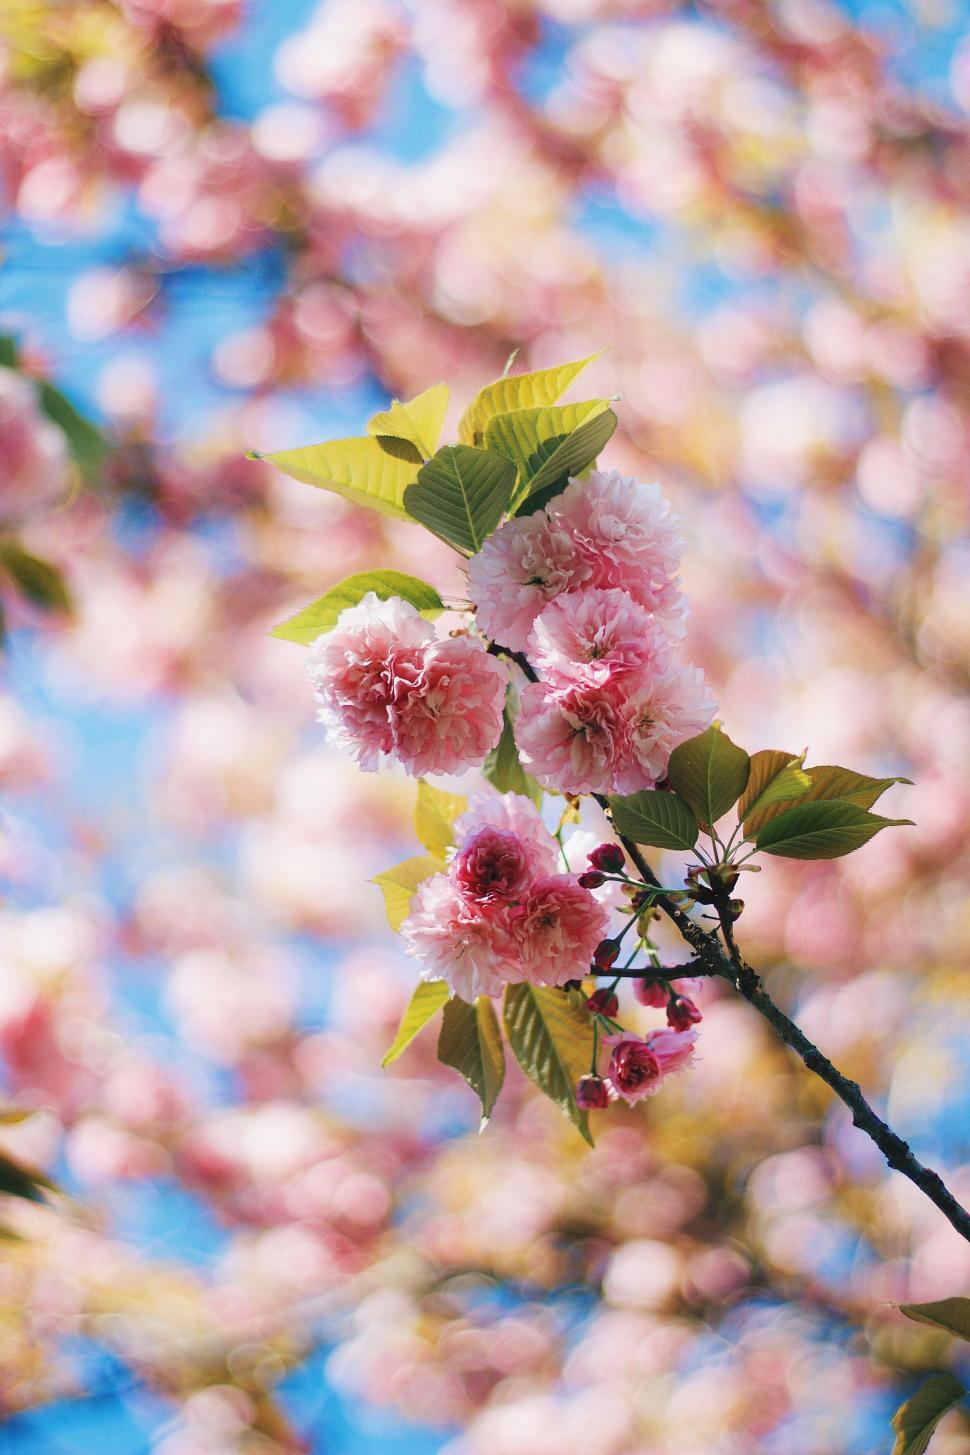 Free Image of Branch With Pink Flowers and Green Leaves 